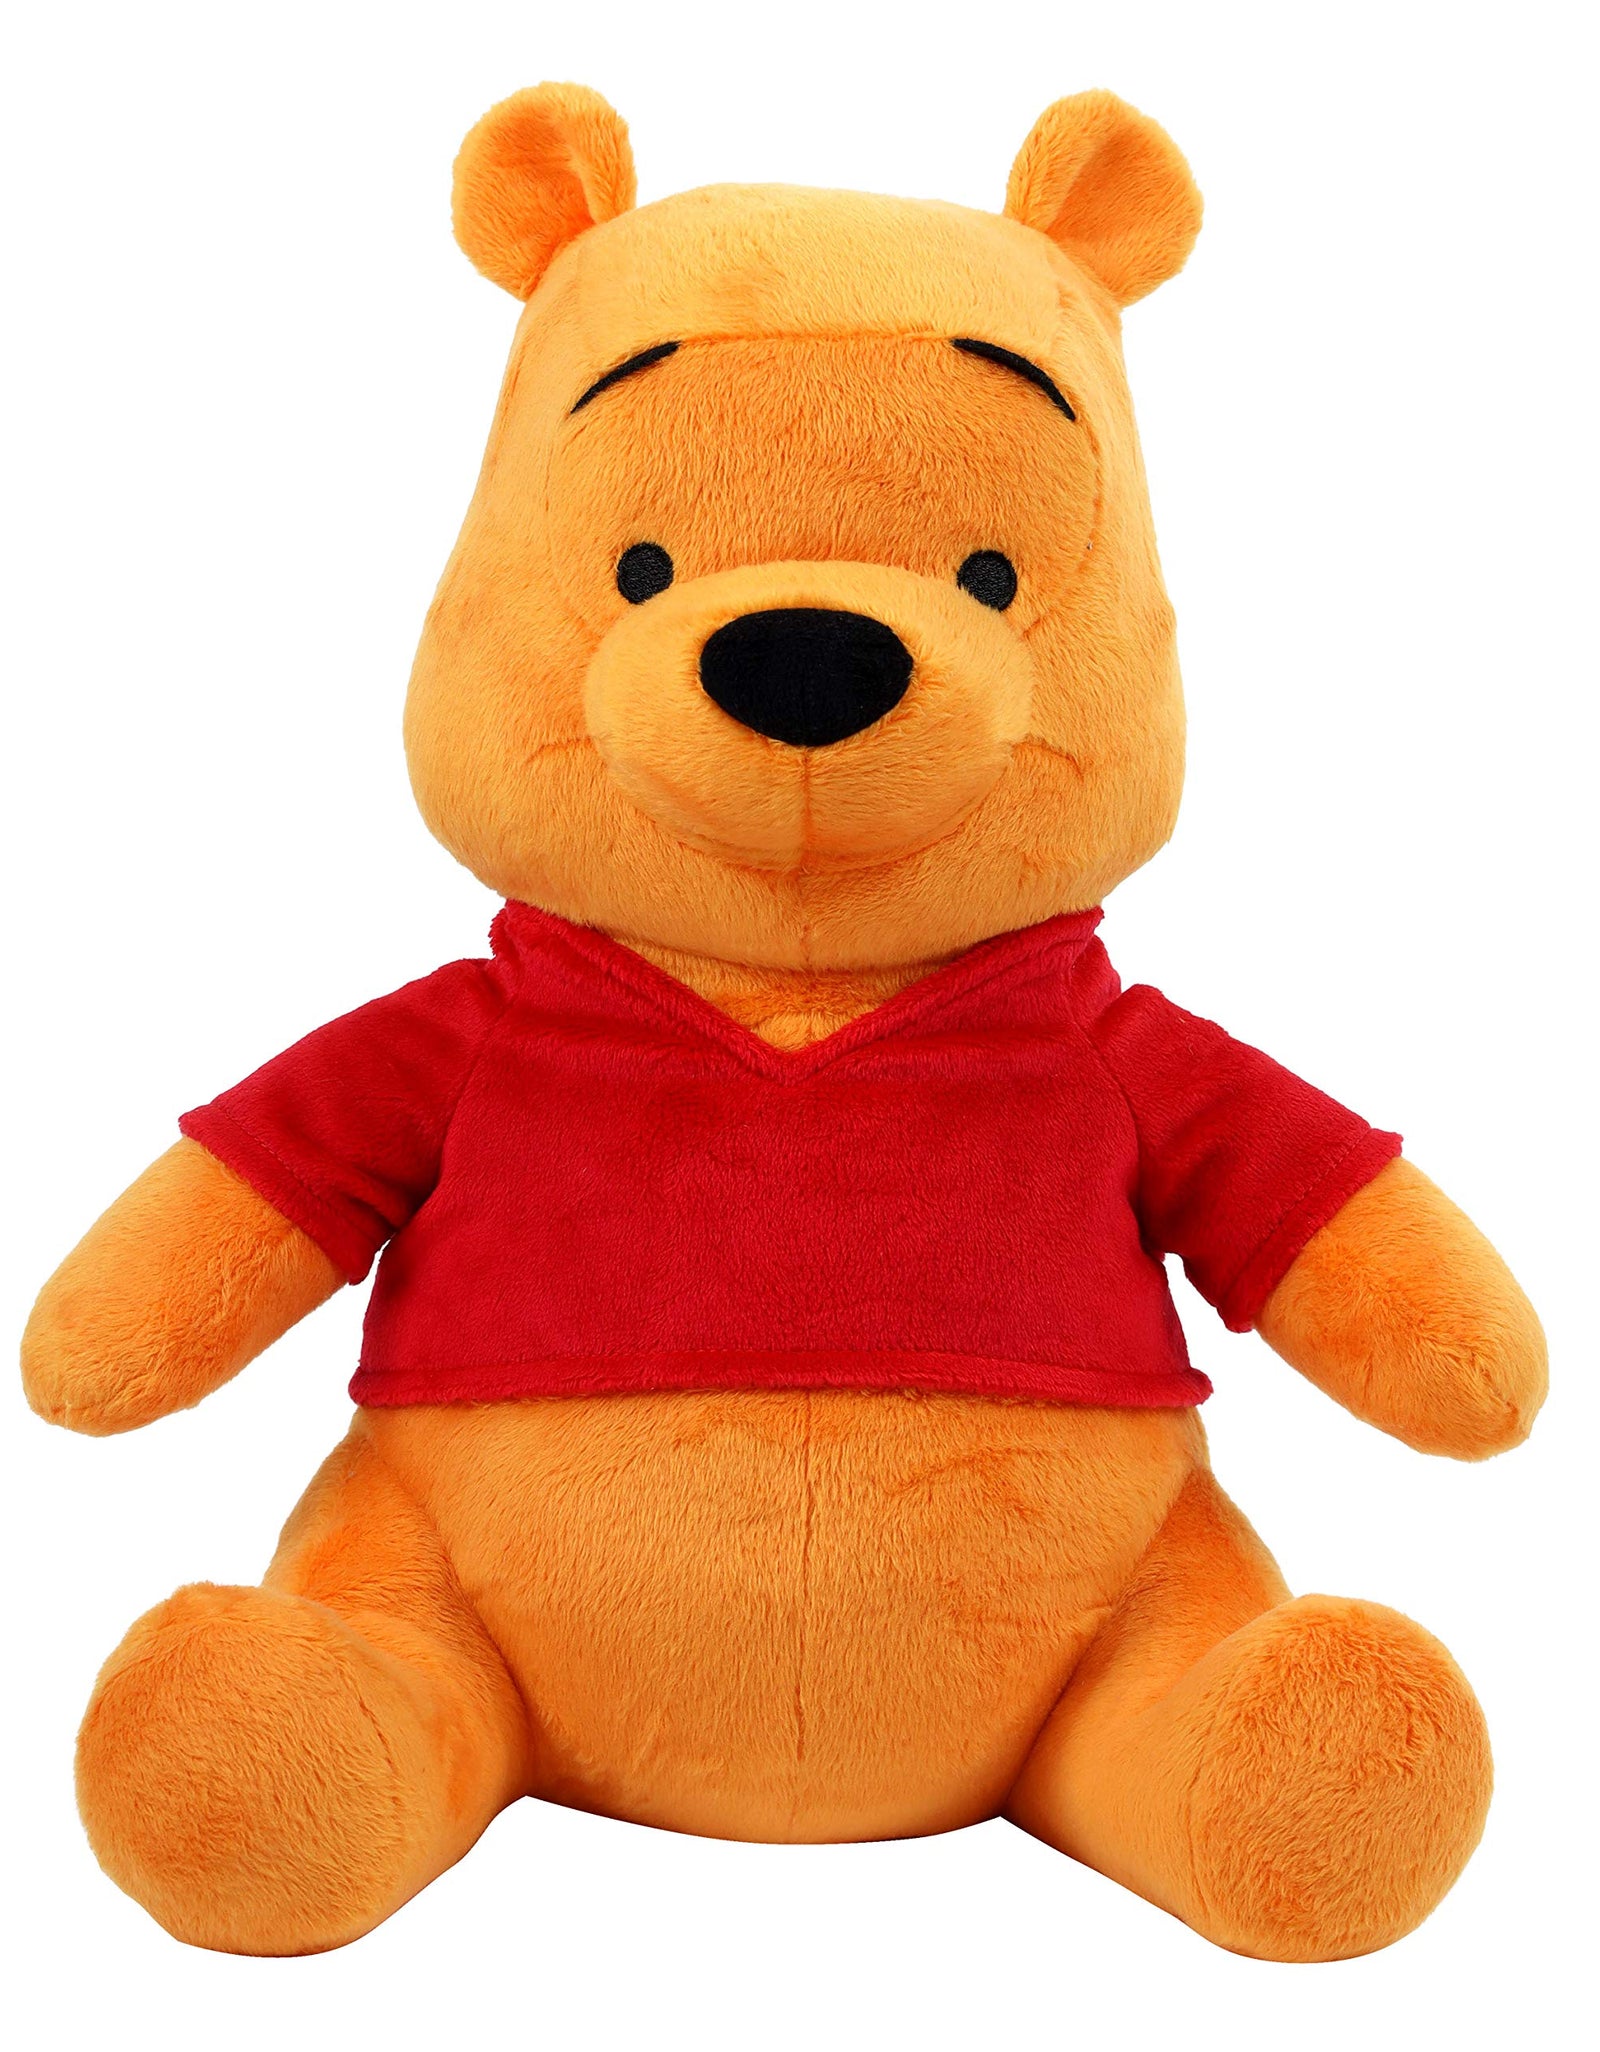 Disney Classics Friends Large 12.2-inch Plush Winnie the Pooh, by Just Play